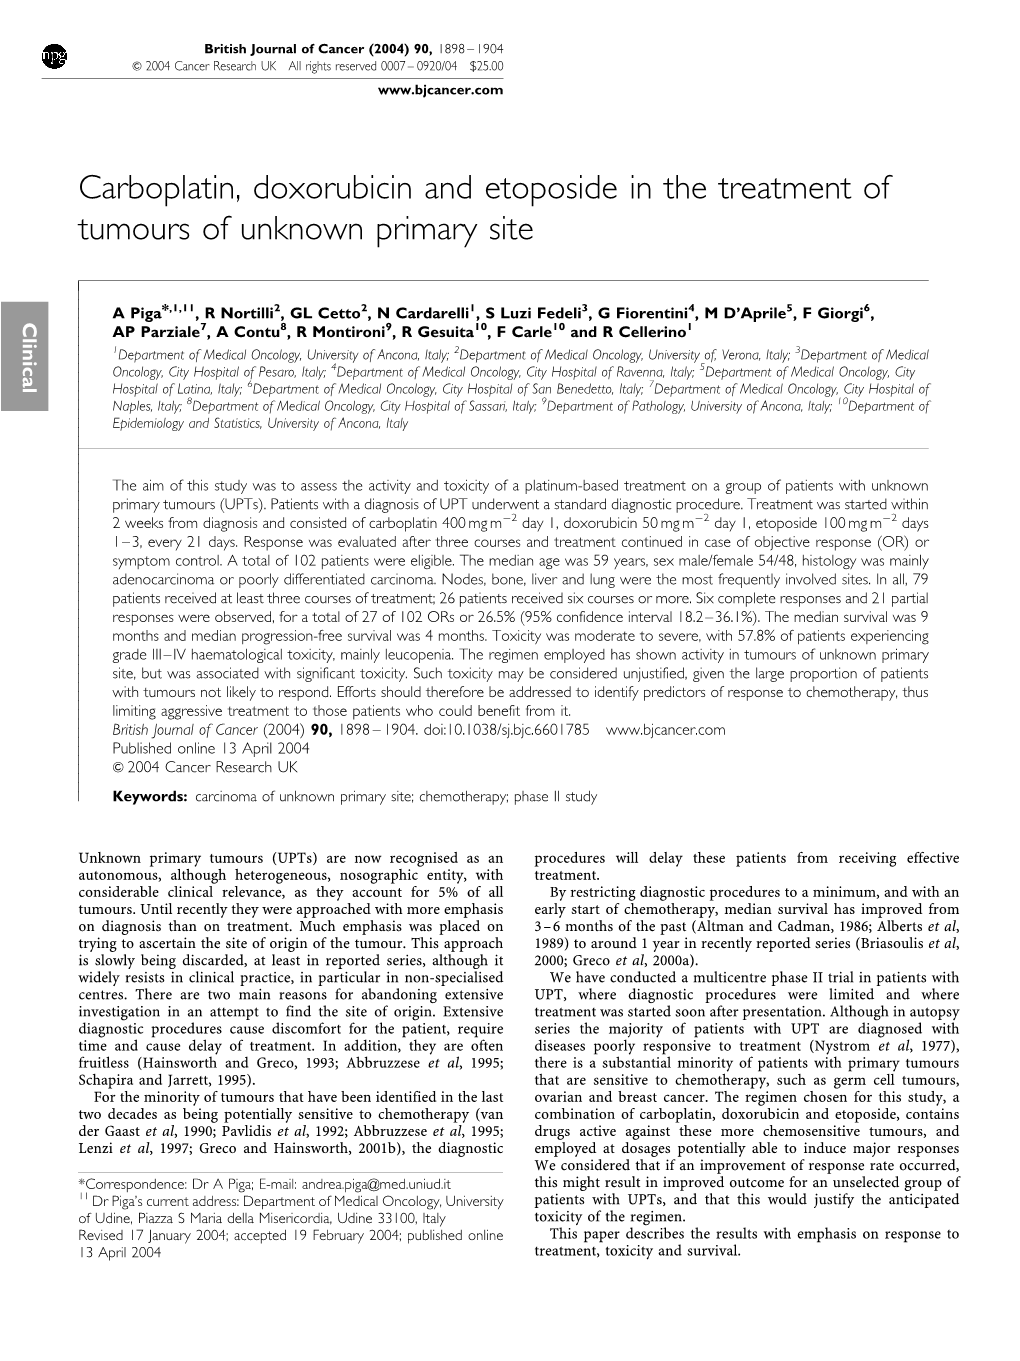 Carboplatin, Doxorubicin and Etoposide in the Treatment of Tumours of Unknown Primary Site